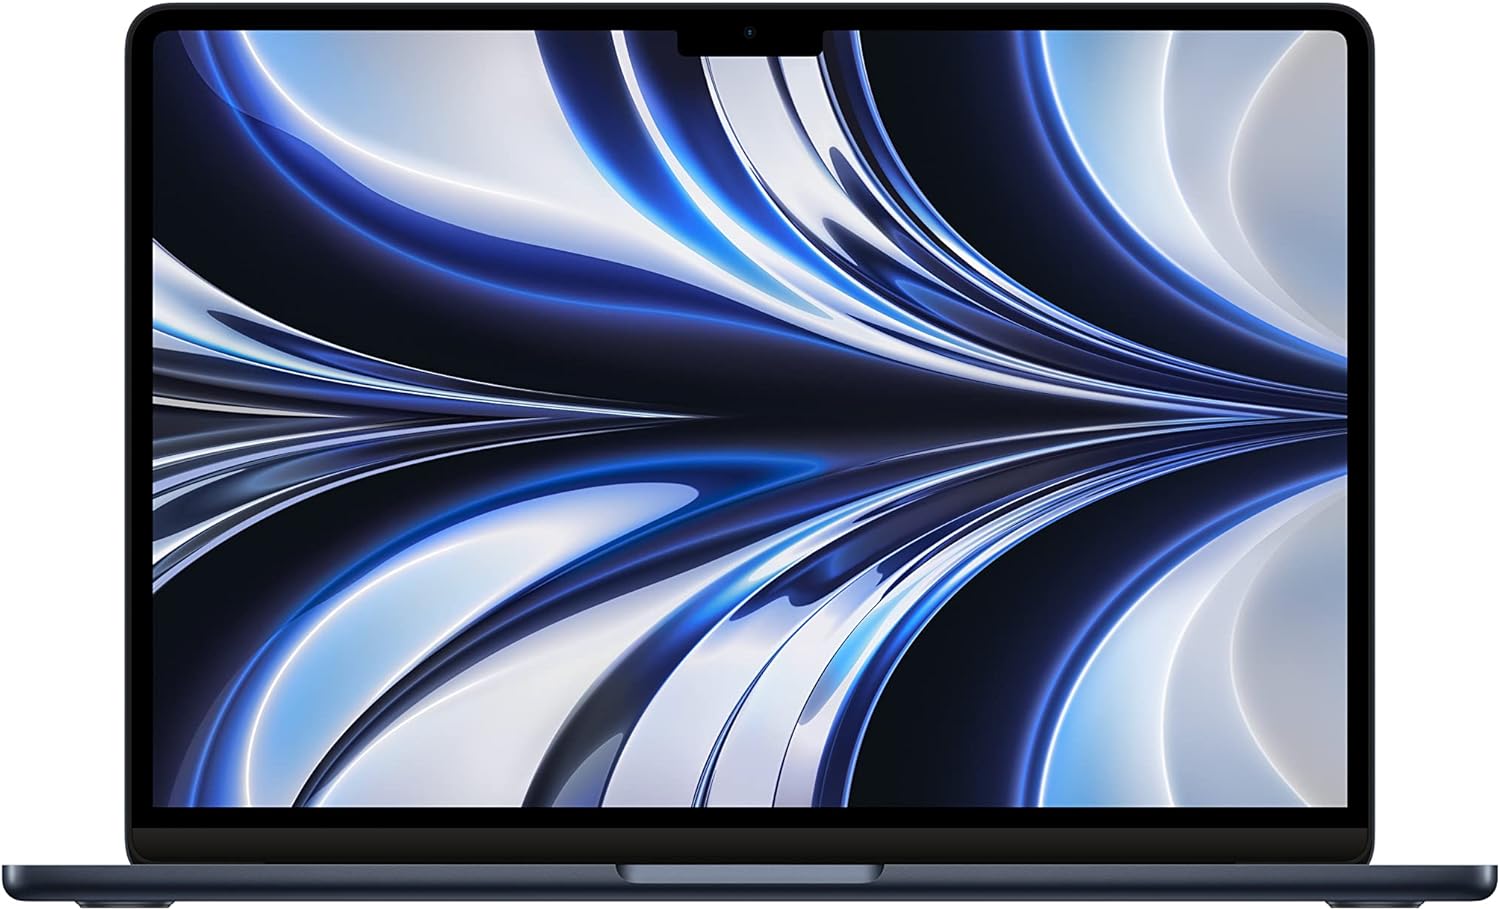 Apple 2022 MacBook Air Laptop with M2 Chip: 13.6-Inch Liquid Retina Display, 8GB RAM, 256GB SSD Storage, Backlit Keyboard, 1080p FaceTime HD Camera. Works with iPhone and iPad; Midnight: Detailed Review & Recommendations